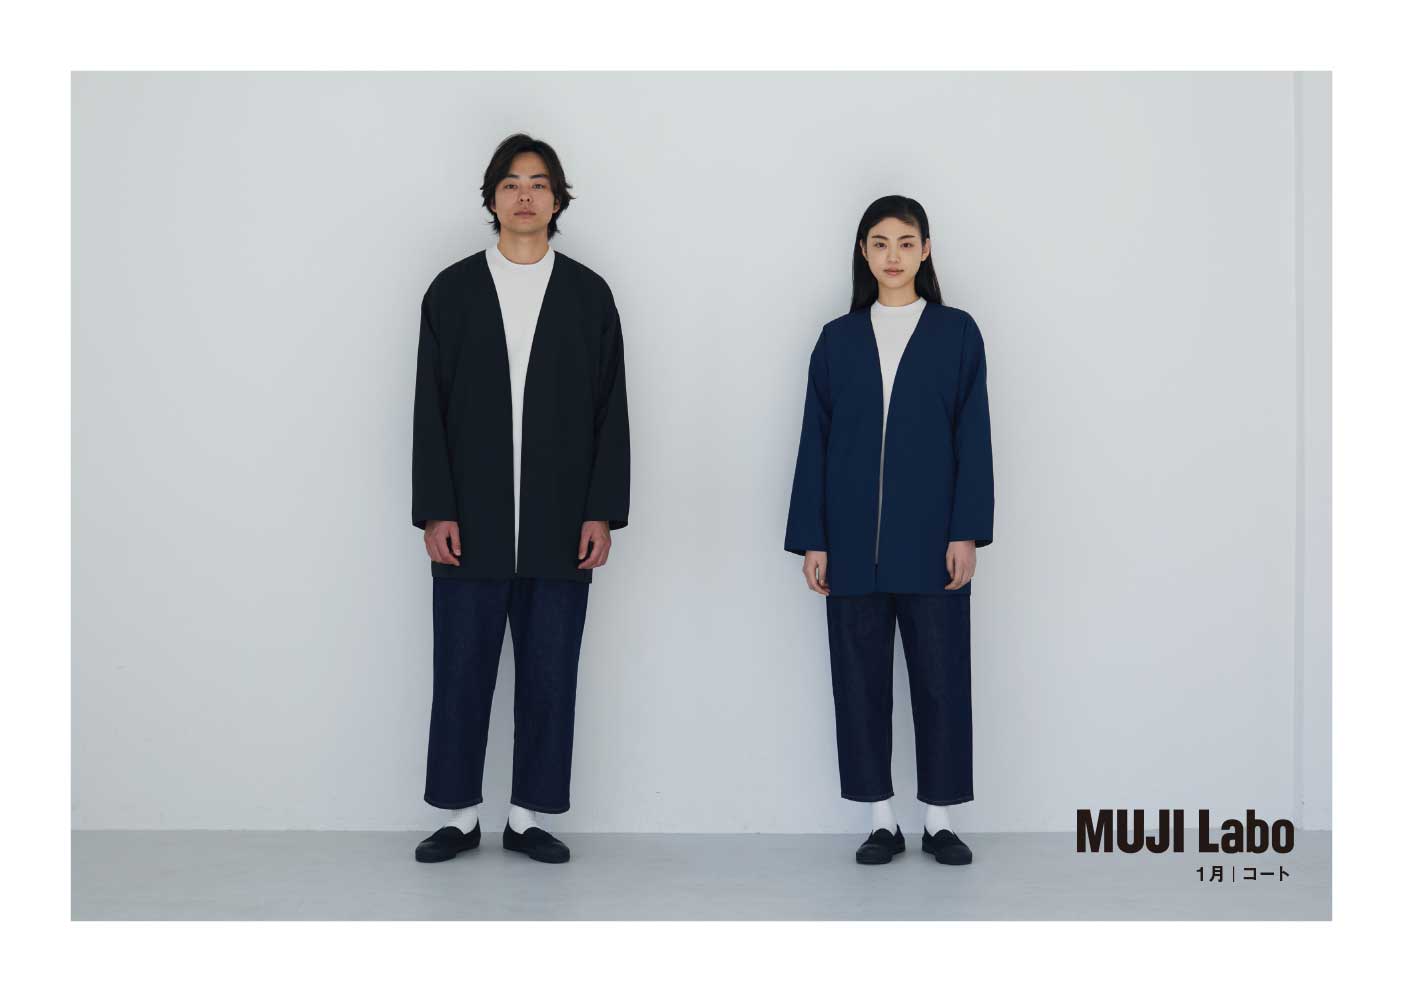 Muji Labo Launches Genderless Clothing Line for Spring/Summer 2019